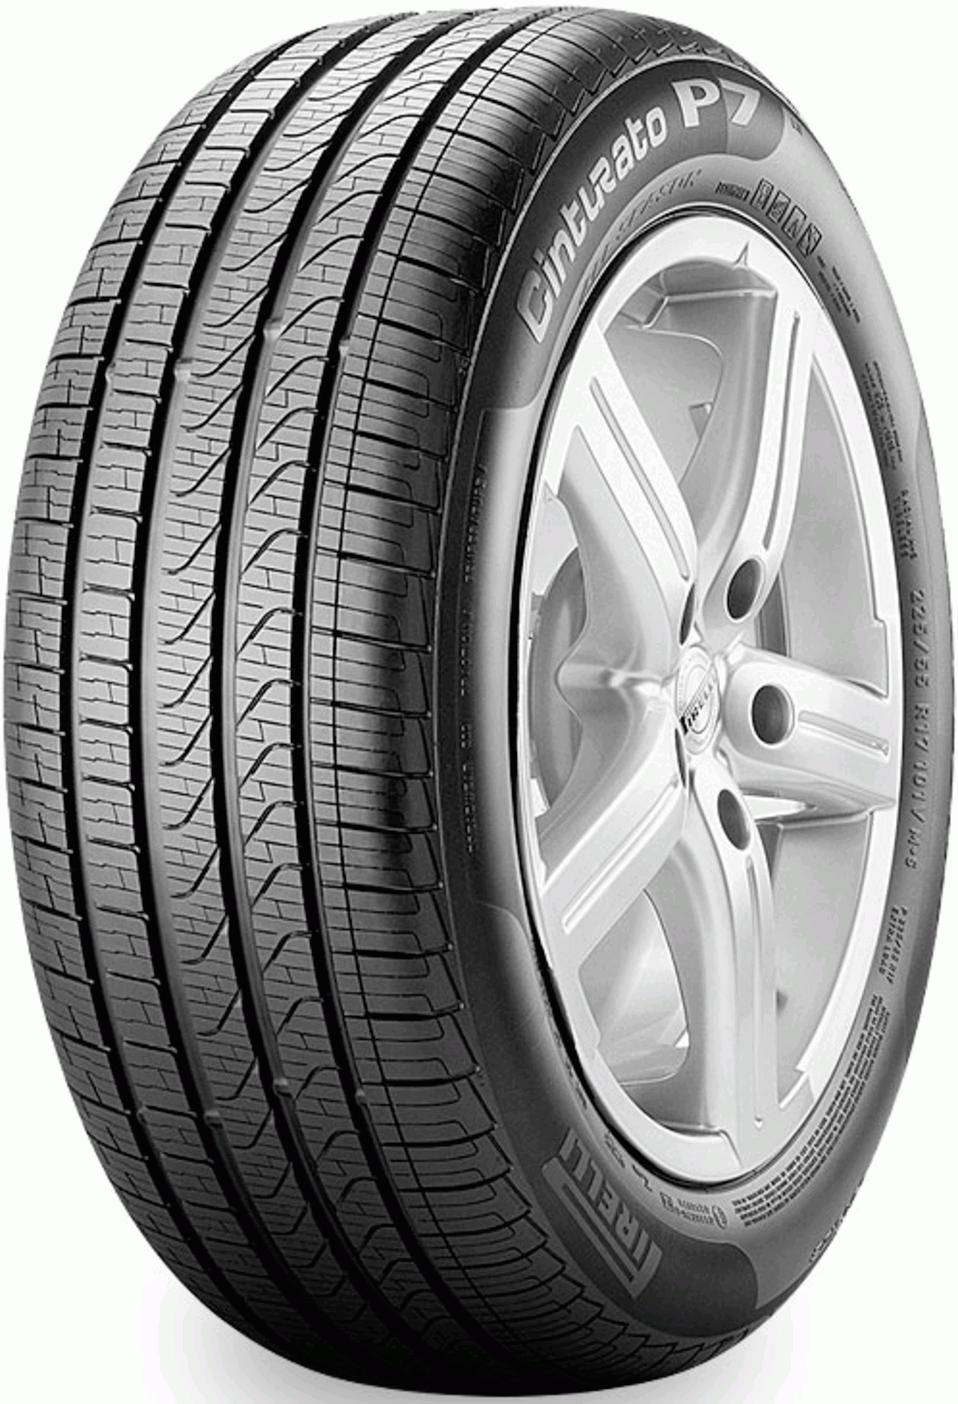 Pirelli Cinturato P7 Blue - Tyre Reviews and Tests